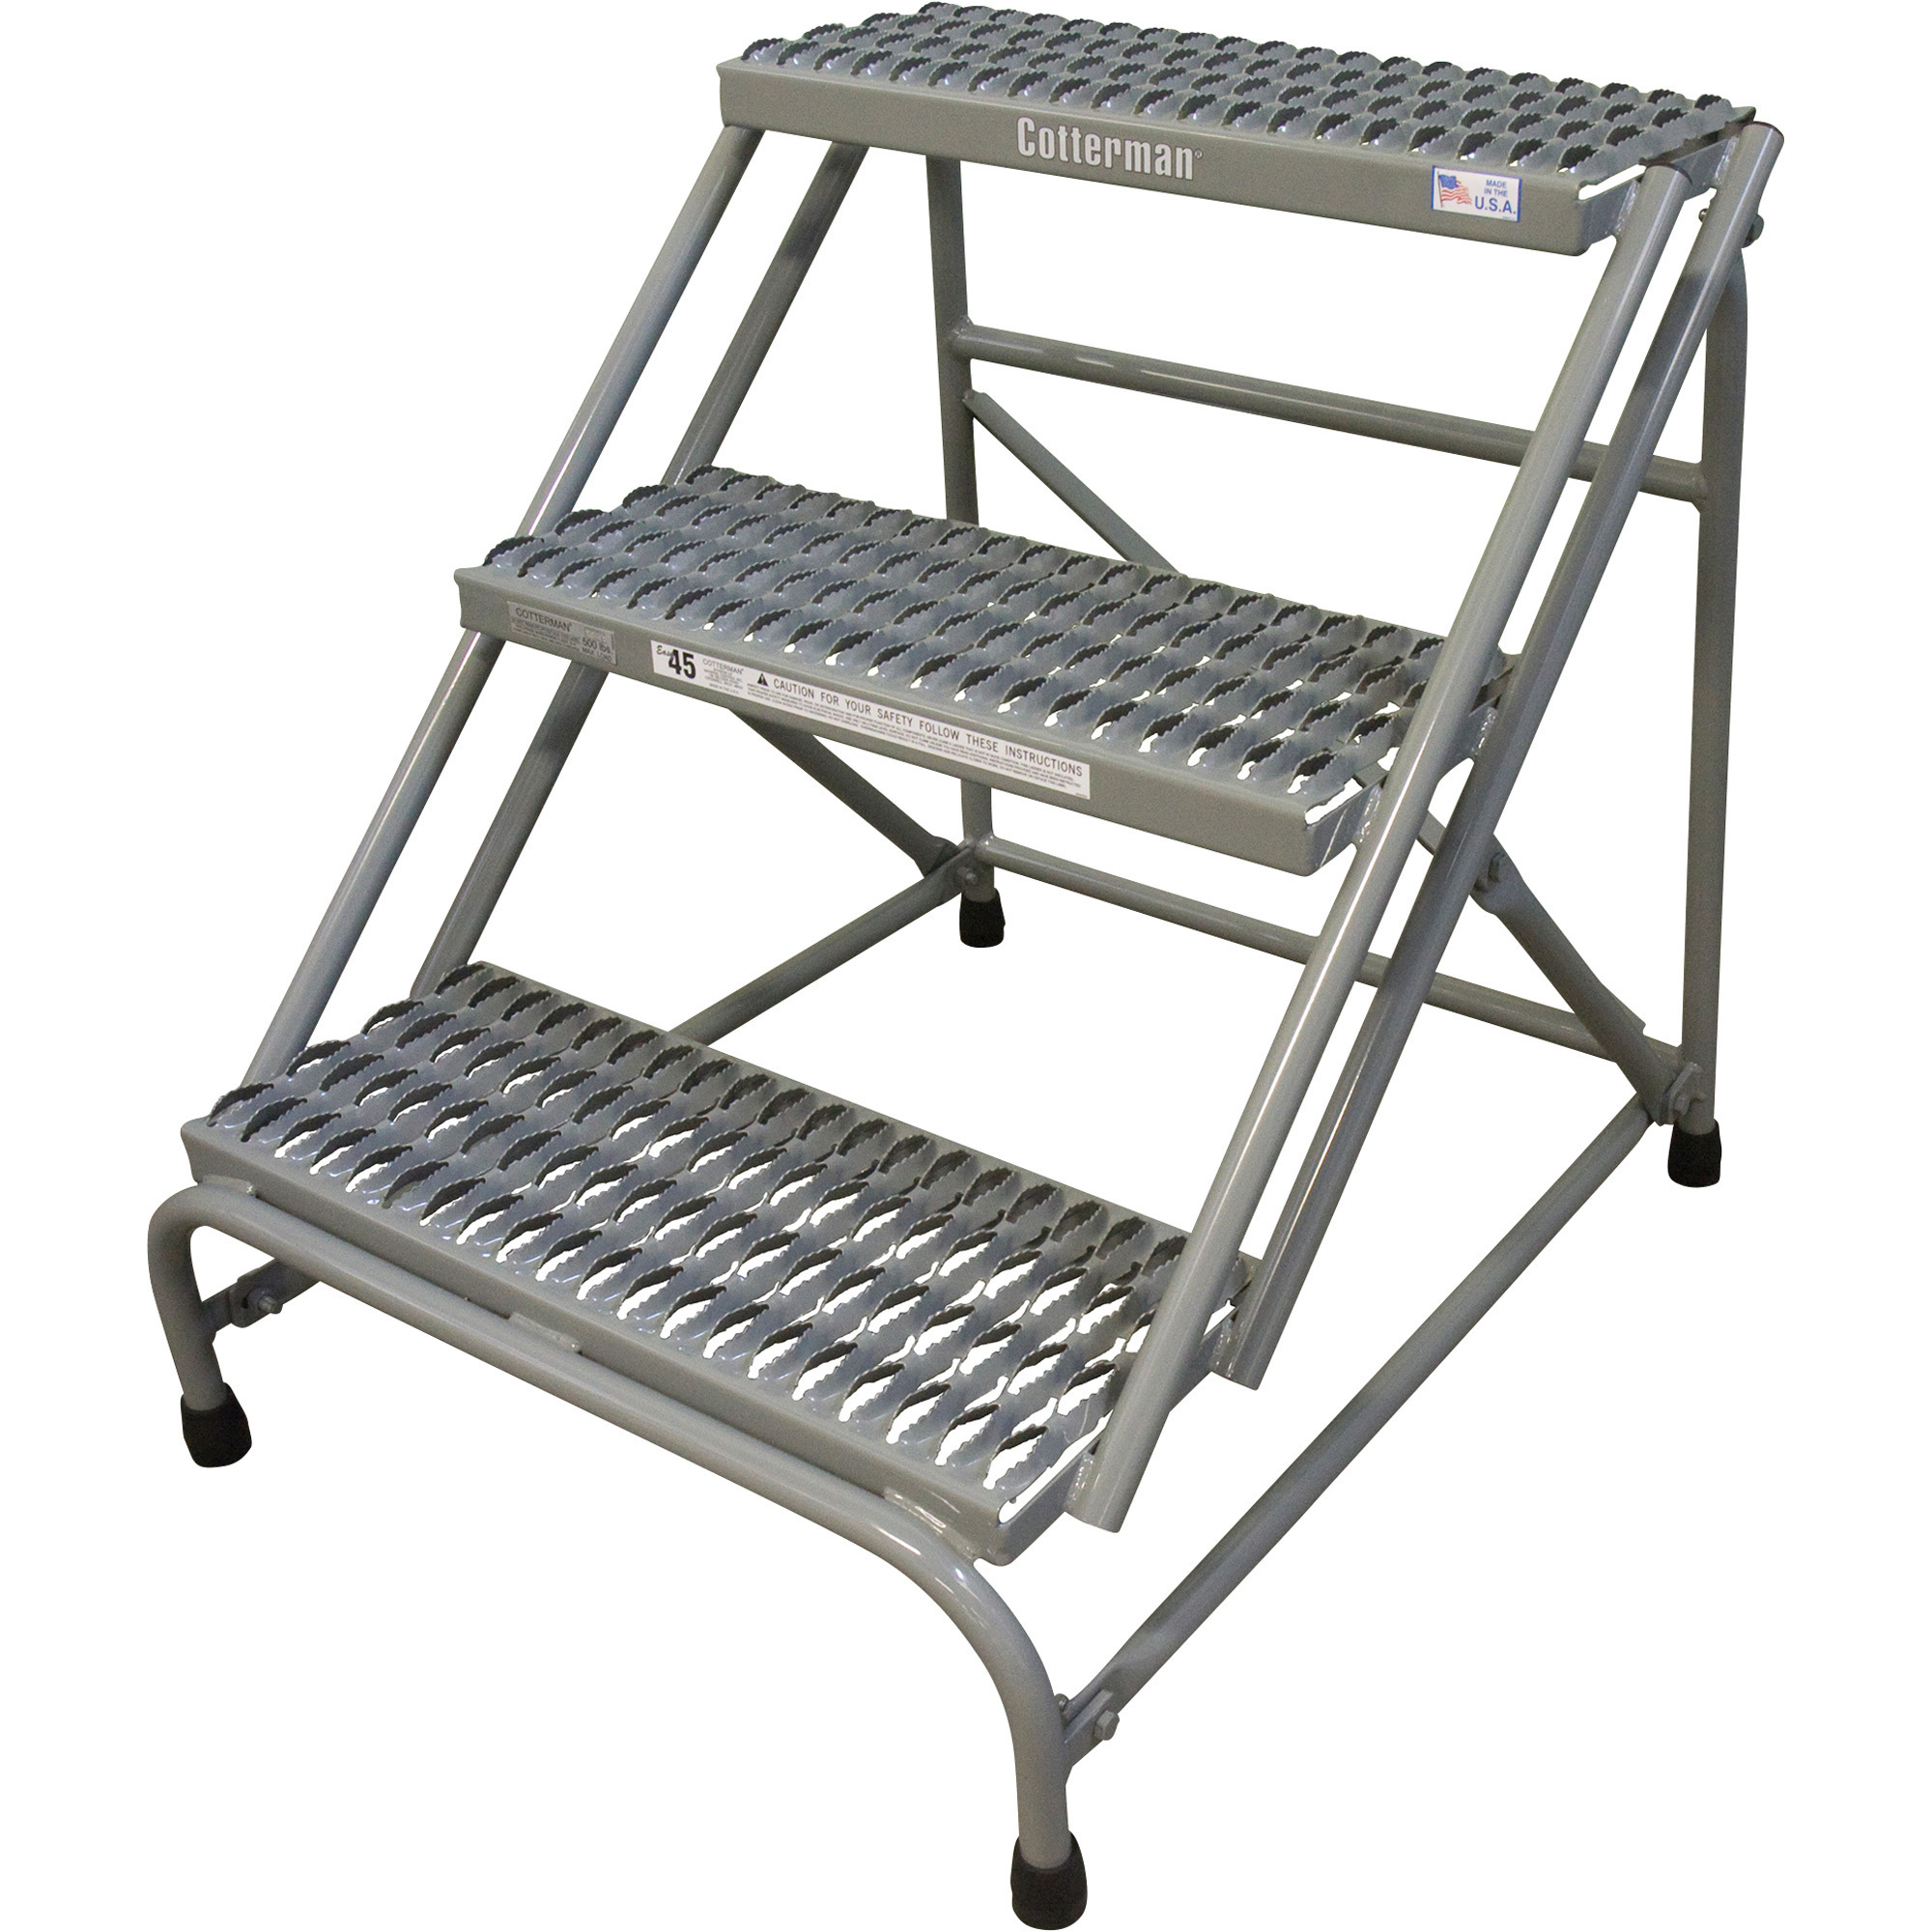 Cotterman Steel Step Stand — 3 Steps, 500-Lb. Capacity, 30in.H